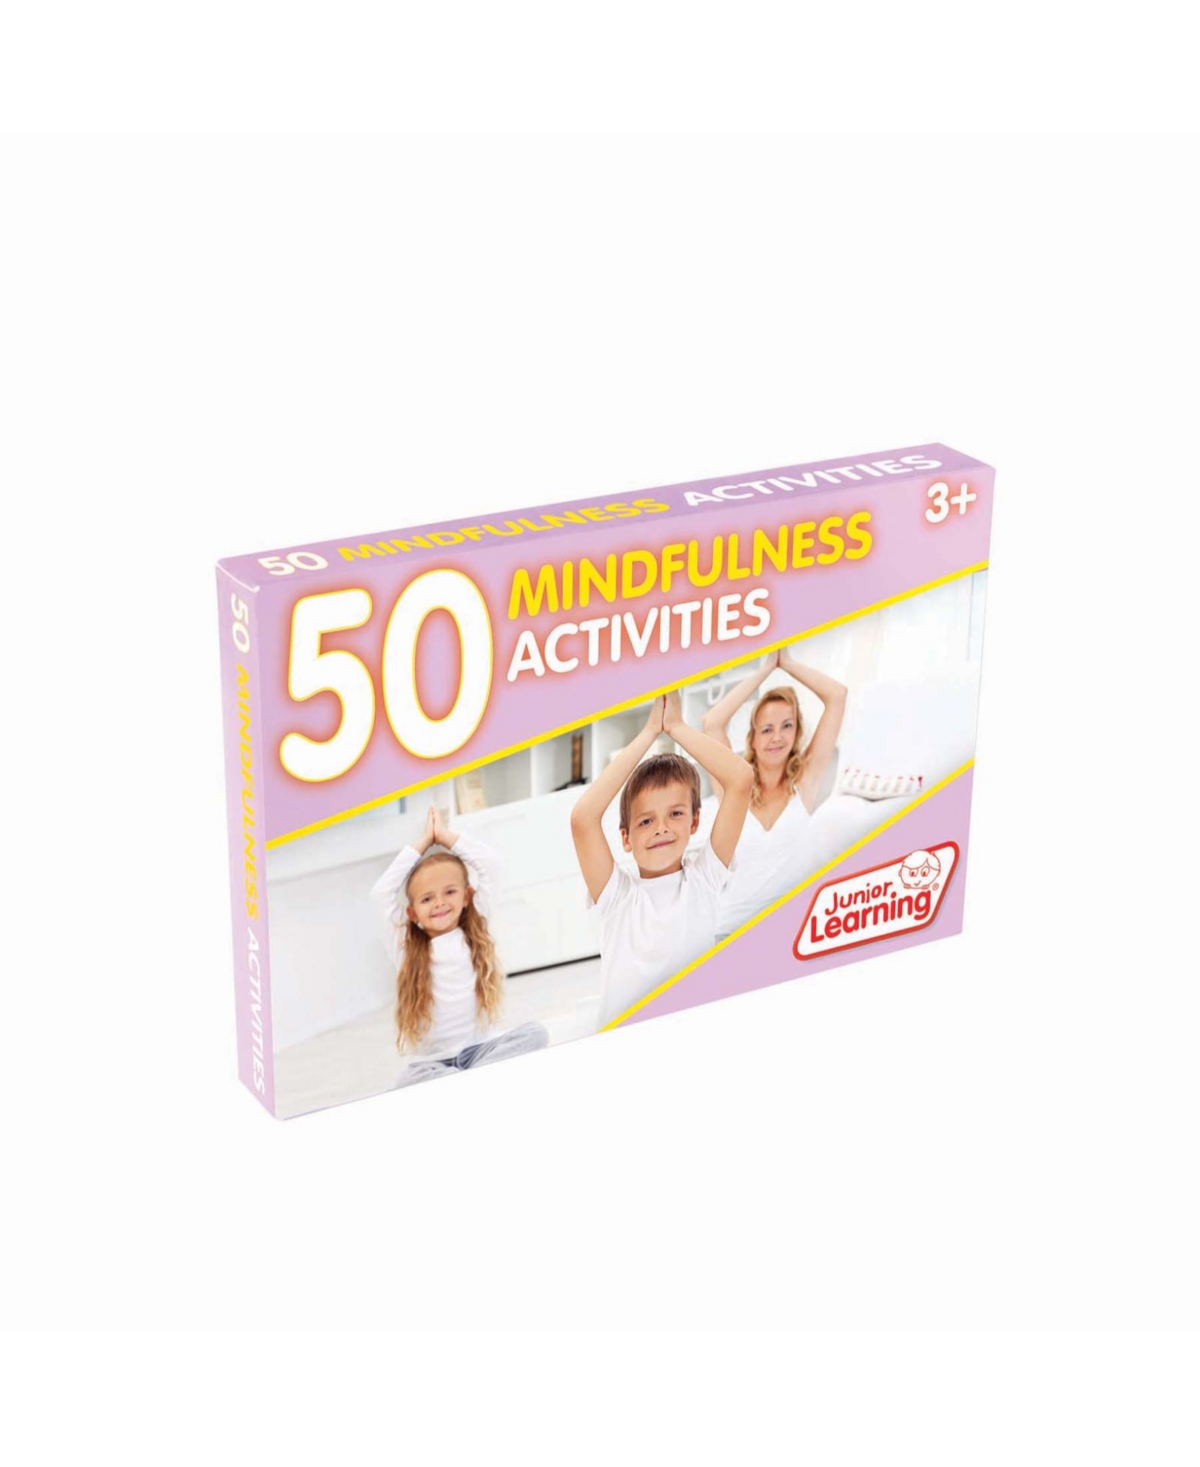 Redbox Junior Learning 50 Mindfulness Educational Activity Cards For Focus And Compassion In Open Misce